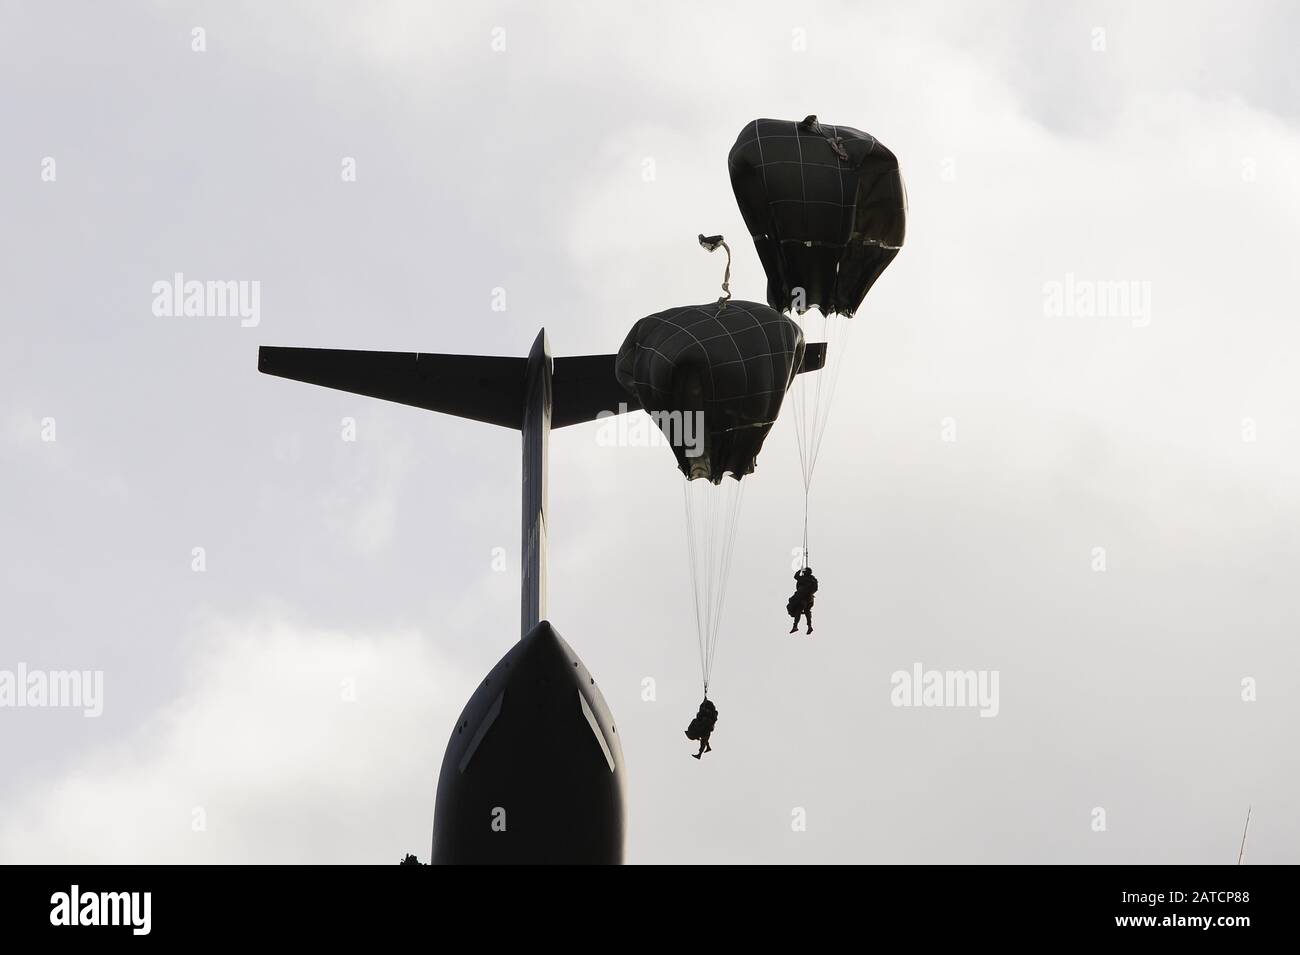 U.S. paratroopers from HHC, 2nd Battalion, 503rd  Infantry Regiment, 173rd Airborne Brigade and Italian paratroopers Reggimento Savoia Cavalleria 3, jump from a U.S Air Force C17 aircraft during the  Exercise Rock Topside 20, Monte Romano, Italy, Jan. 29, 2020. Rock Topside is a joint forced entry exercise to train the battalion’s ability to conduct airborne contingency response force operations. This training stresses the interoperability of both the paratroopers of the 2nd Battalion, 503rd Infantry Regiment and Italian paratroopers of Reggimento Savoia Cavalleria 3. (U.S Army photo by Elena Stock Photo